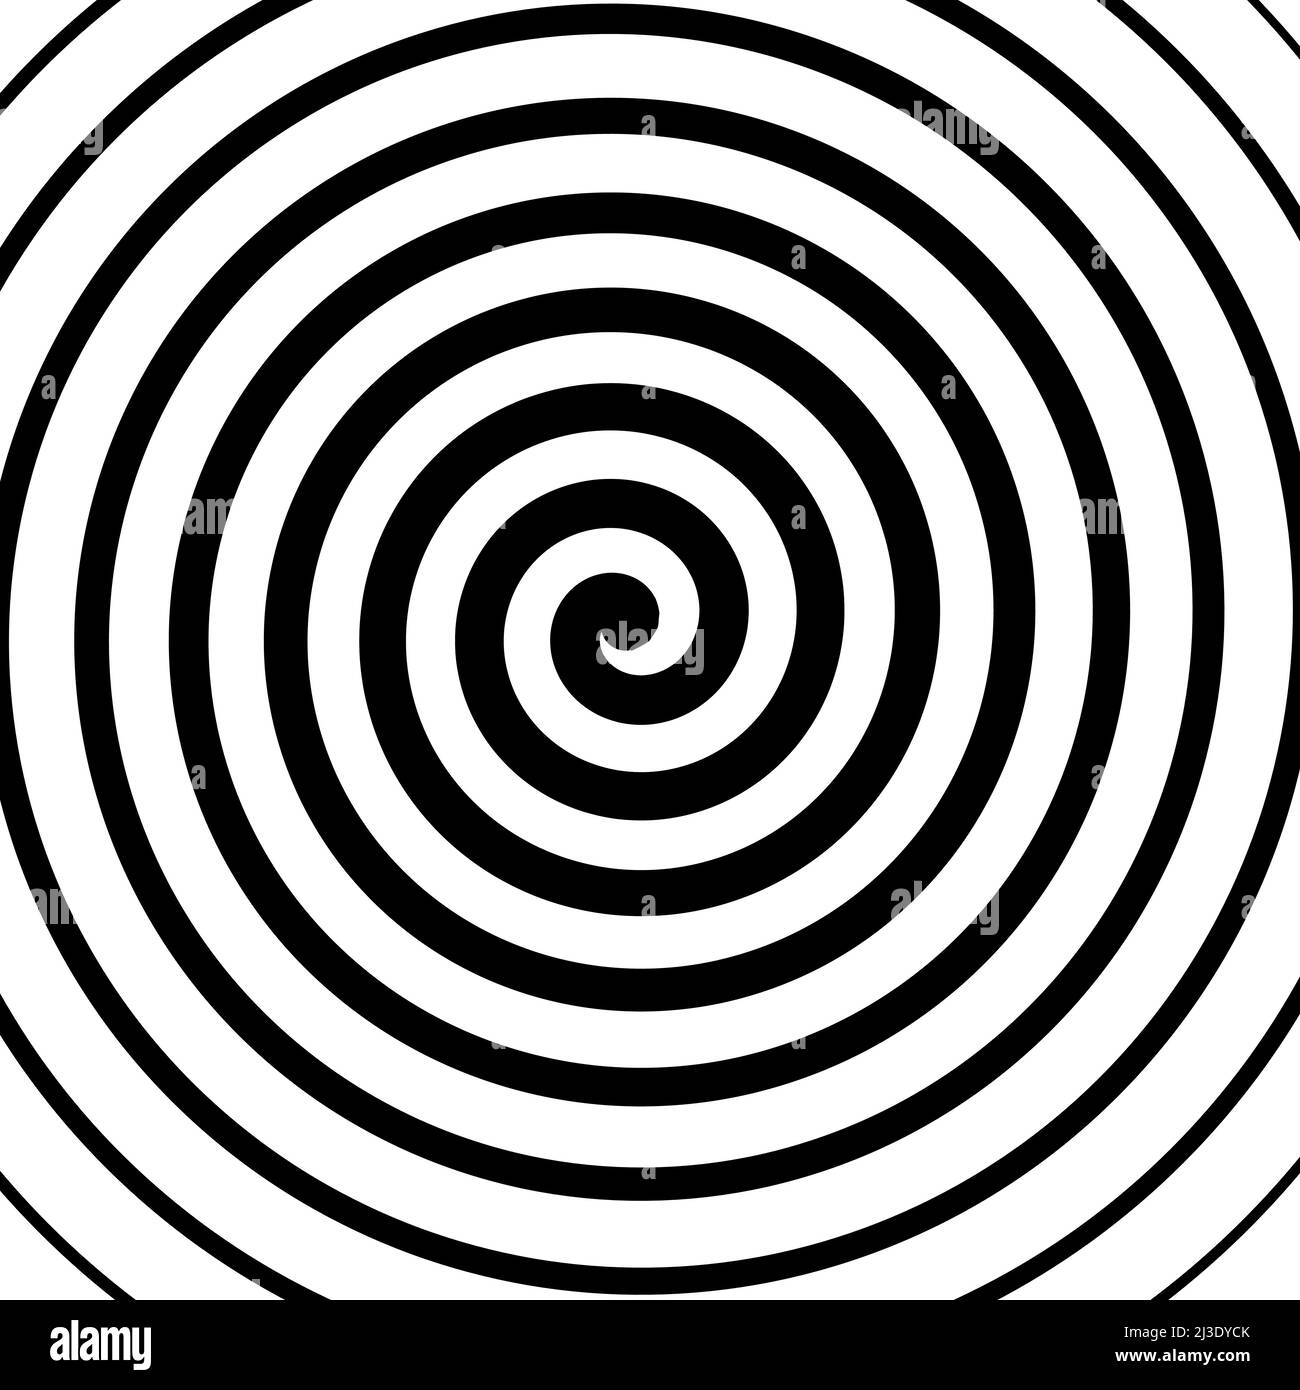 Vector spiral background in black and white. Hypnosis theme. Abstract design element Stock Vector